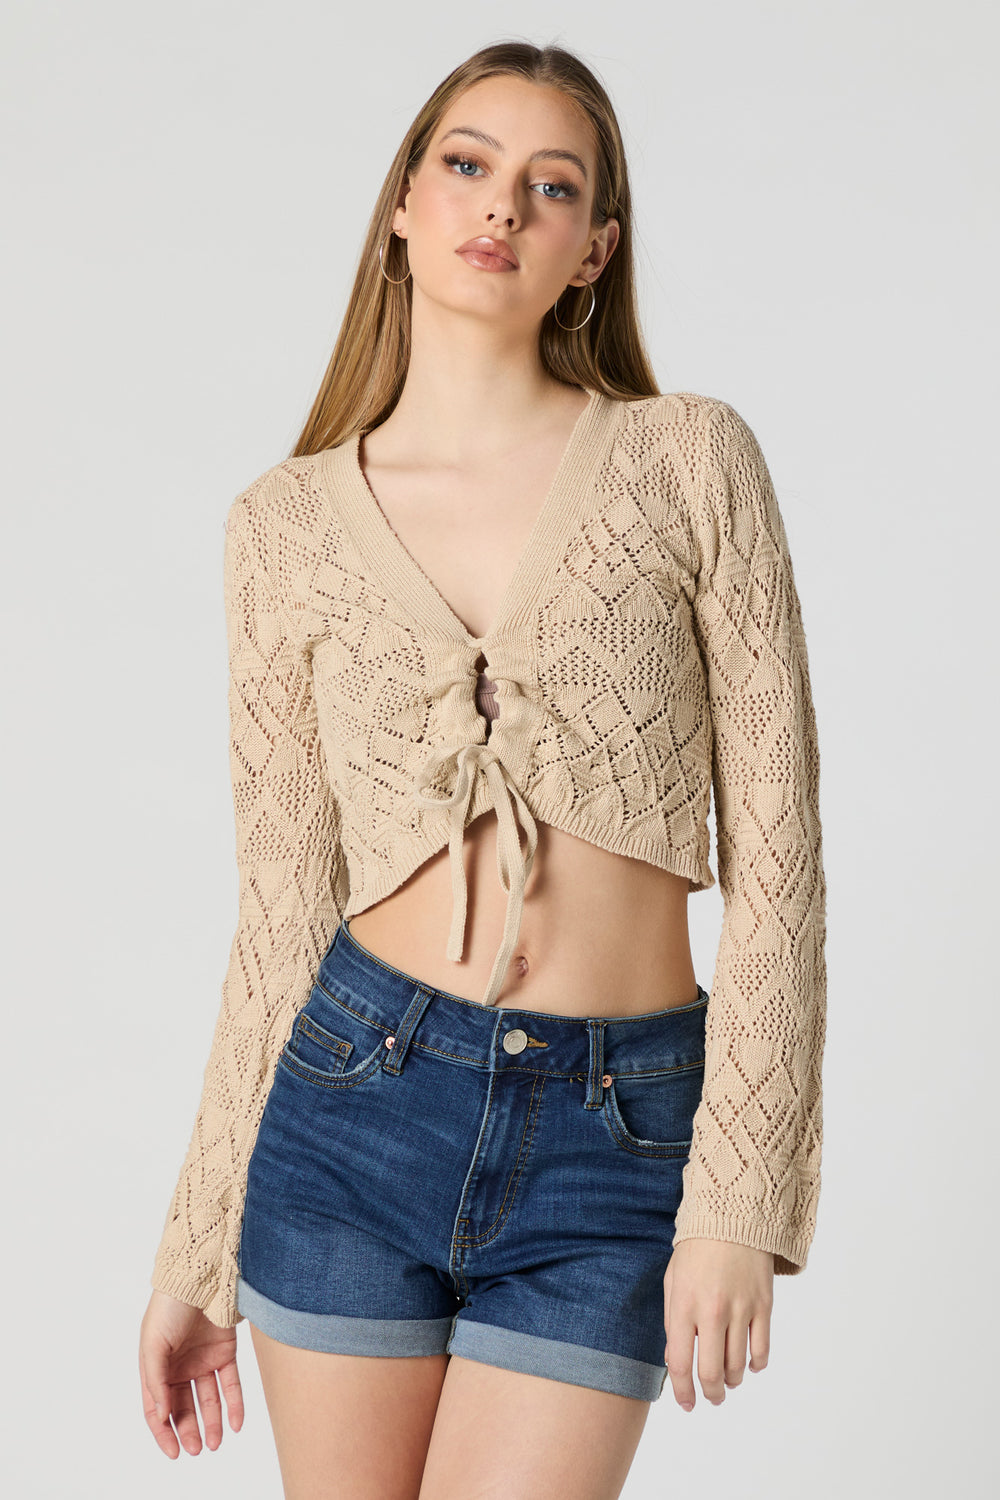 Crochet Front Tie Cropped Long Sleeve Top Crochet Front Tie Cropped Long Sleeve Top 4